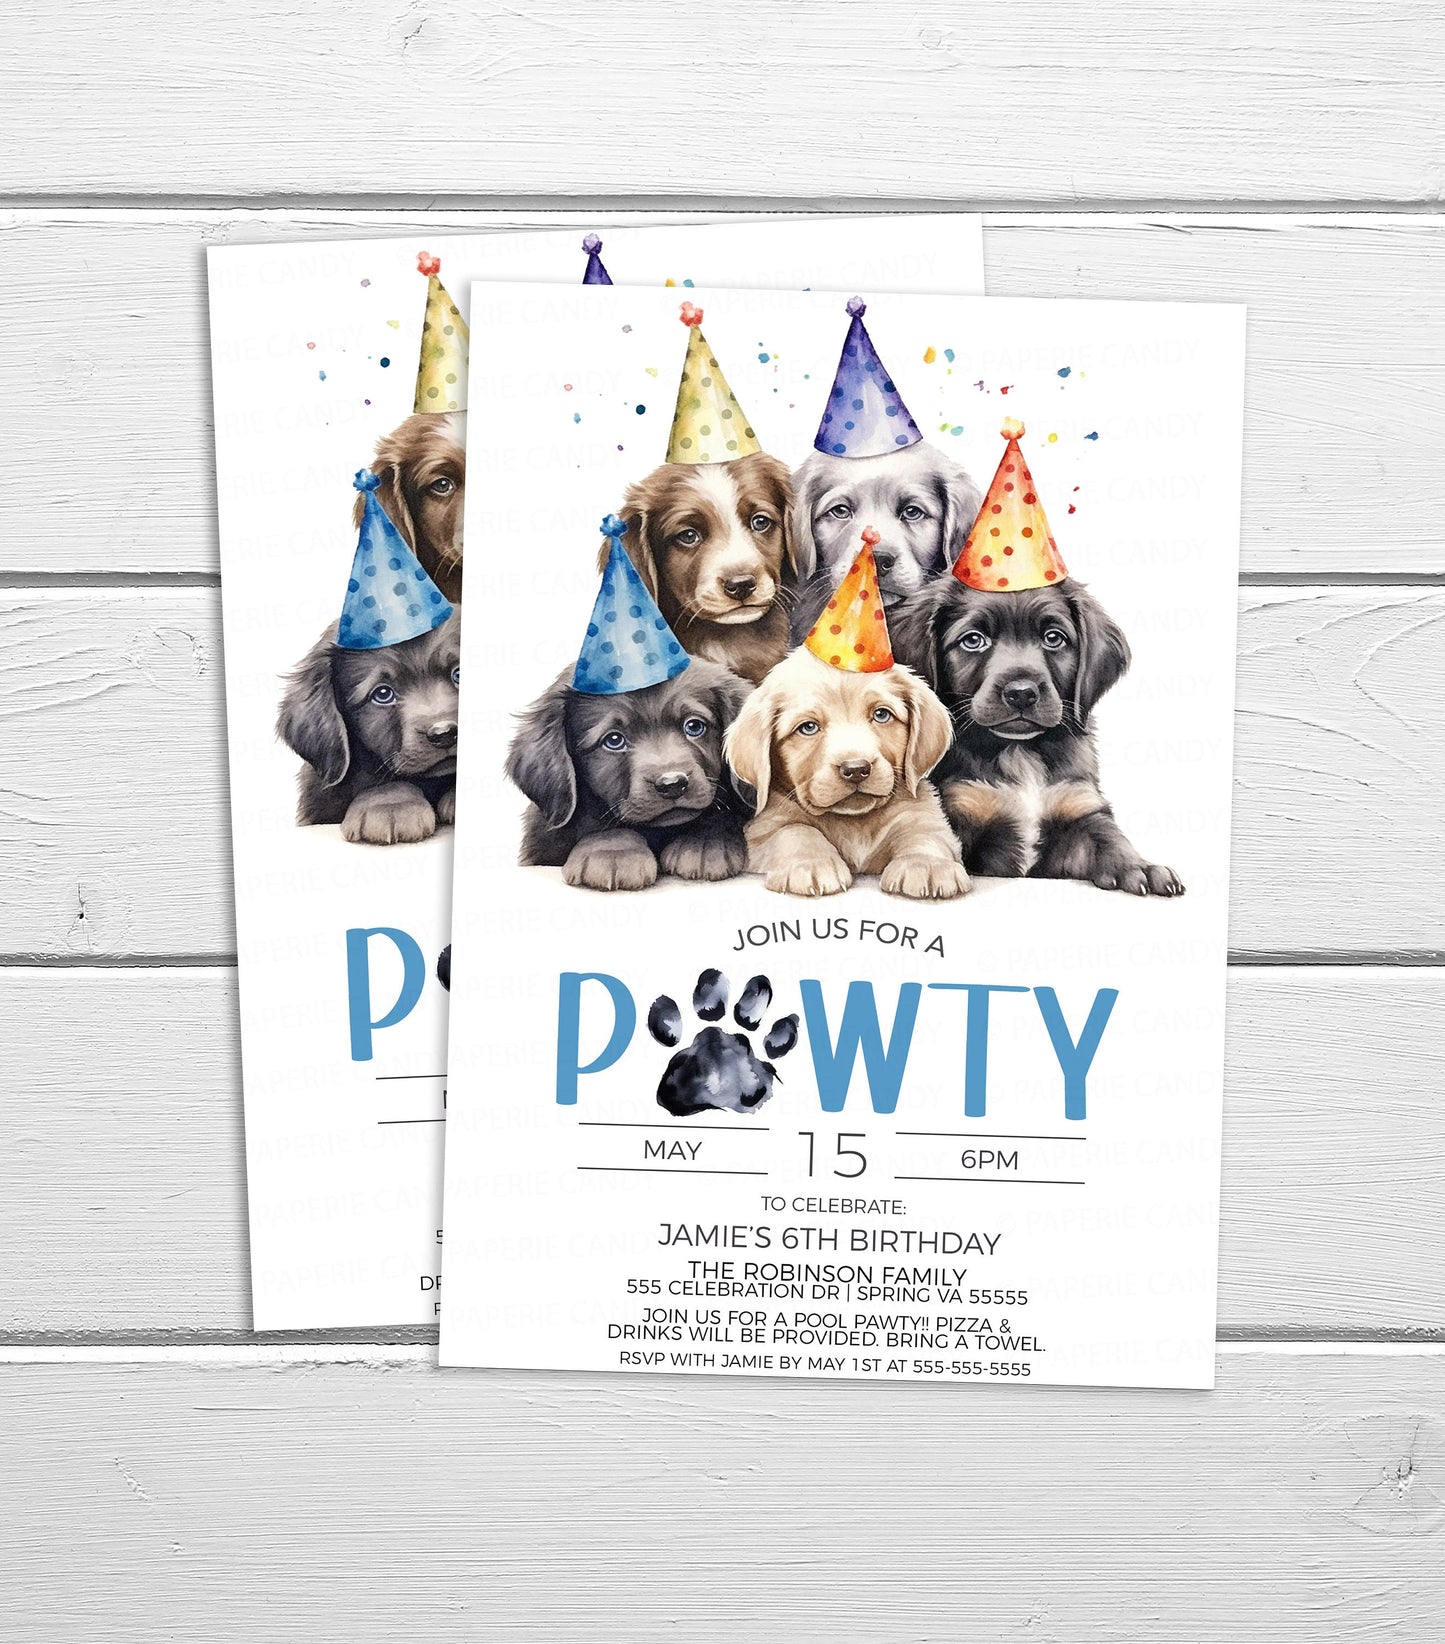 Puppy Invitation, Puppy Pawty Invite, Puppy Dog Birthday Party, Let's Pawty, Calling All Pawty Animals, Editable Printable Template